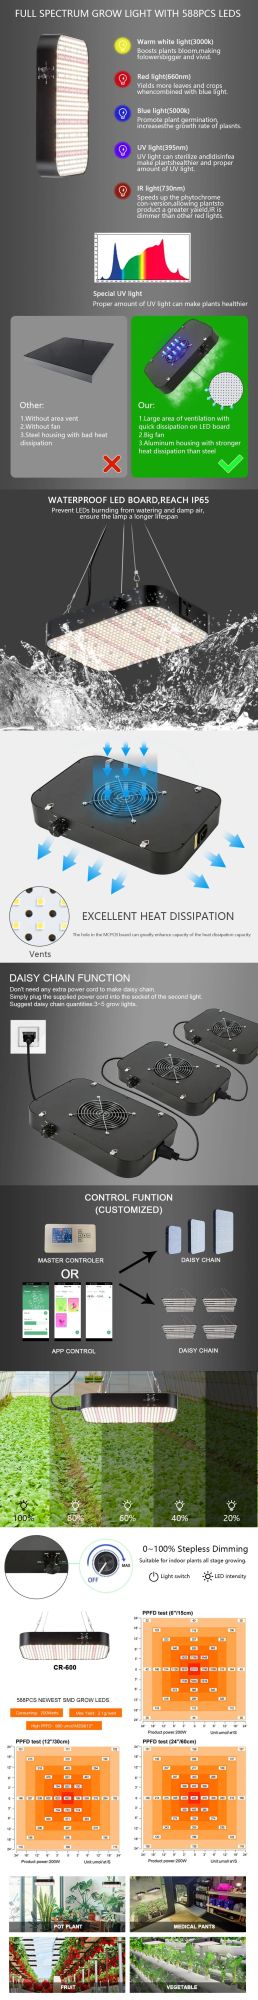 Wholesale Indoor LED Grow Light Hydroponic Systems